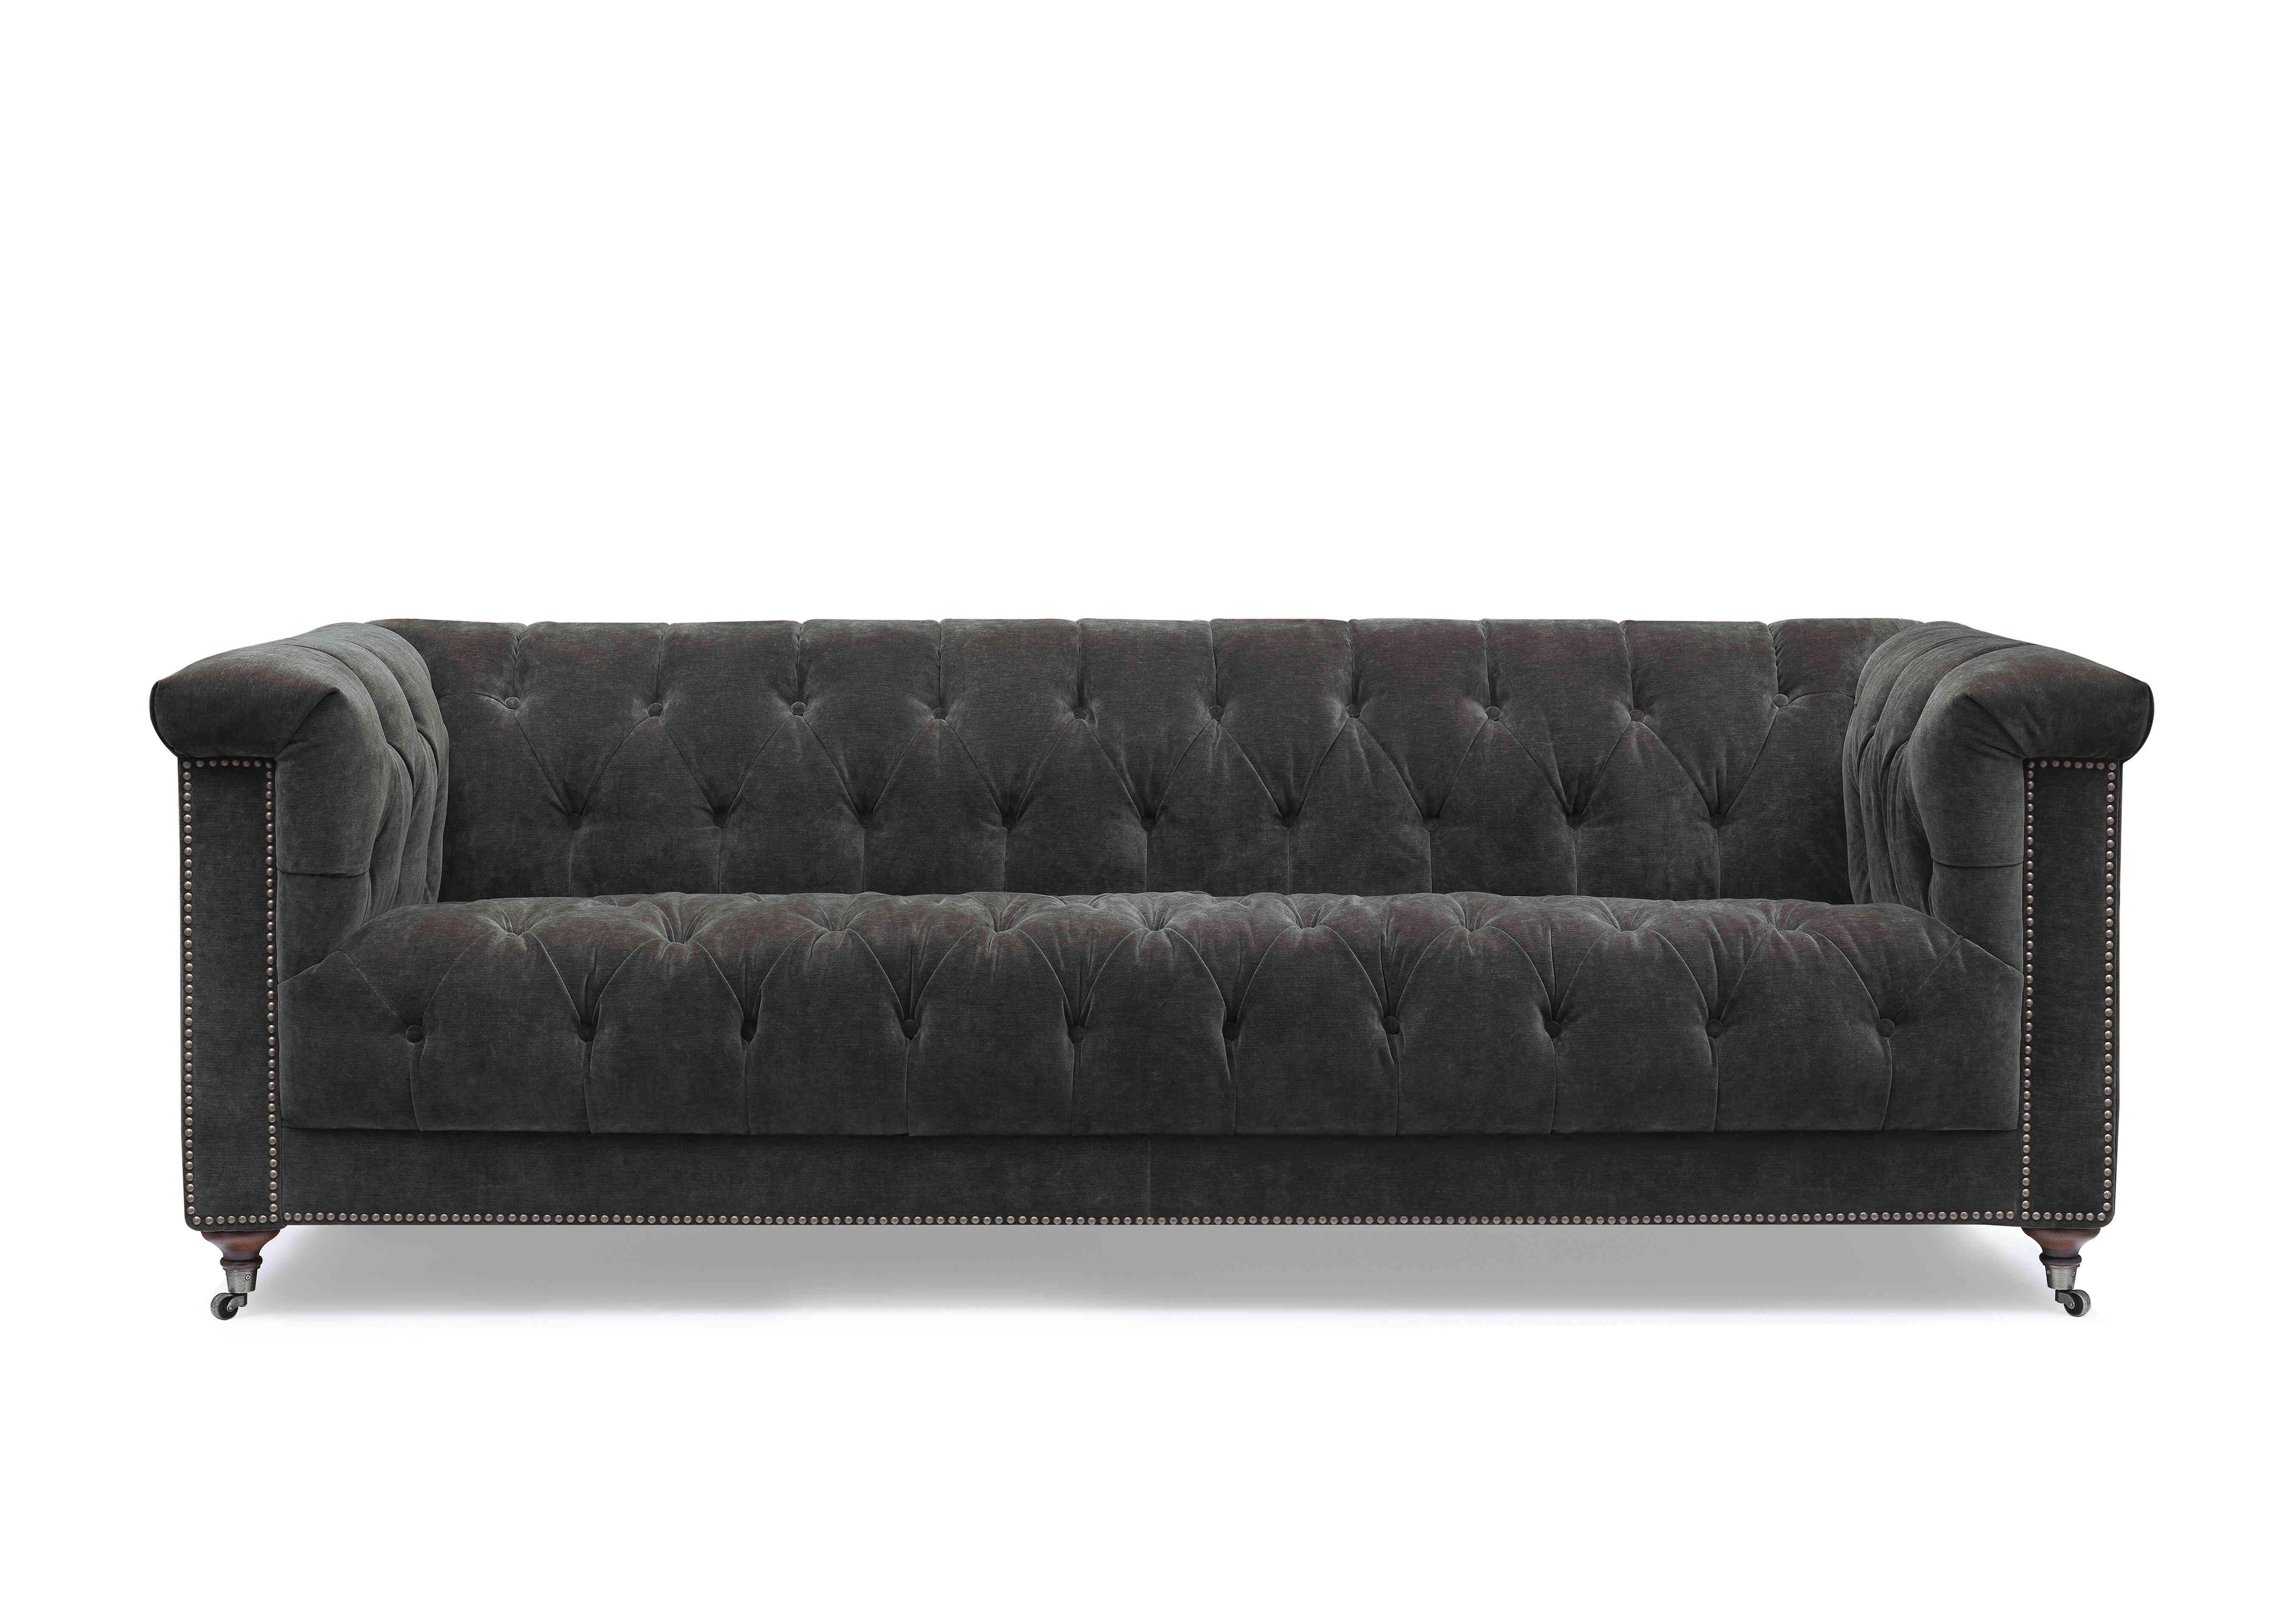 Wallace 4 Seater Fabric Chesterfield Sofa in X3y2-W021 Moonstone on Furniture Village